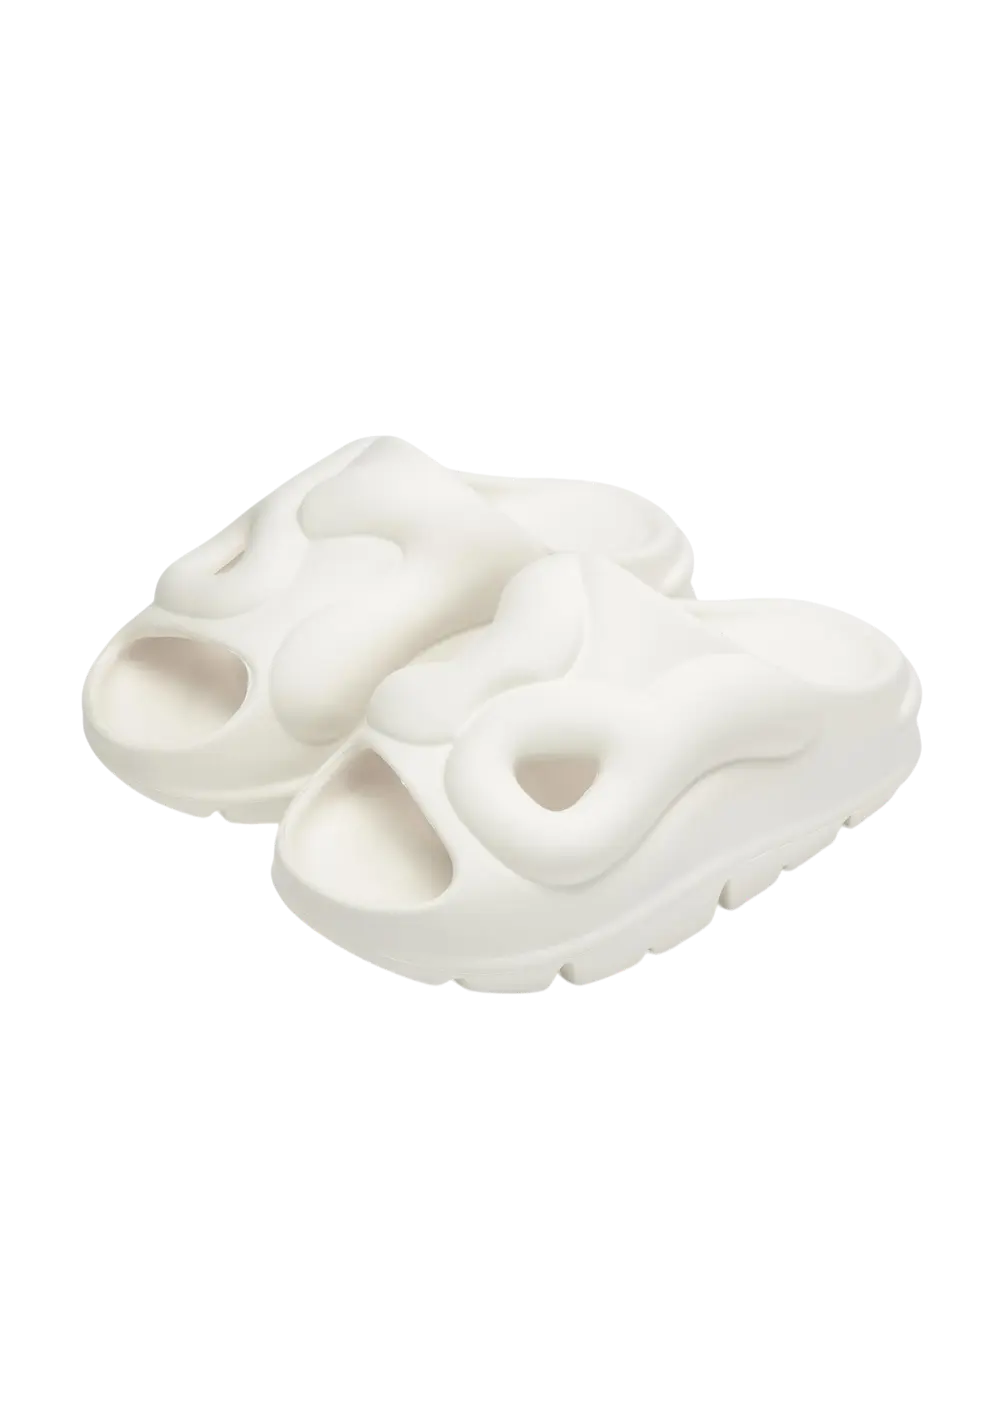 Cloud Bread Slippers - PSYLOS 1, Cloud Bread Slippers, Shoes, PCLP, PSYLOS 1